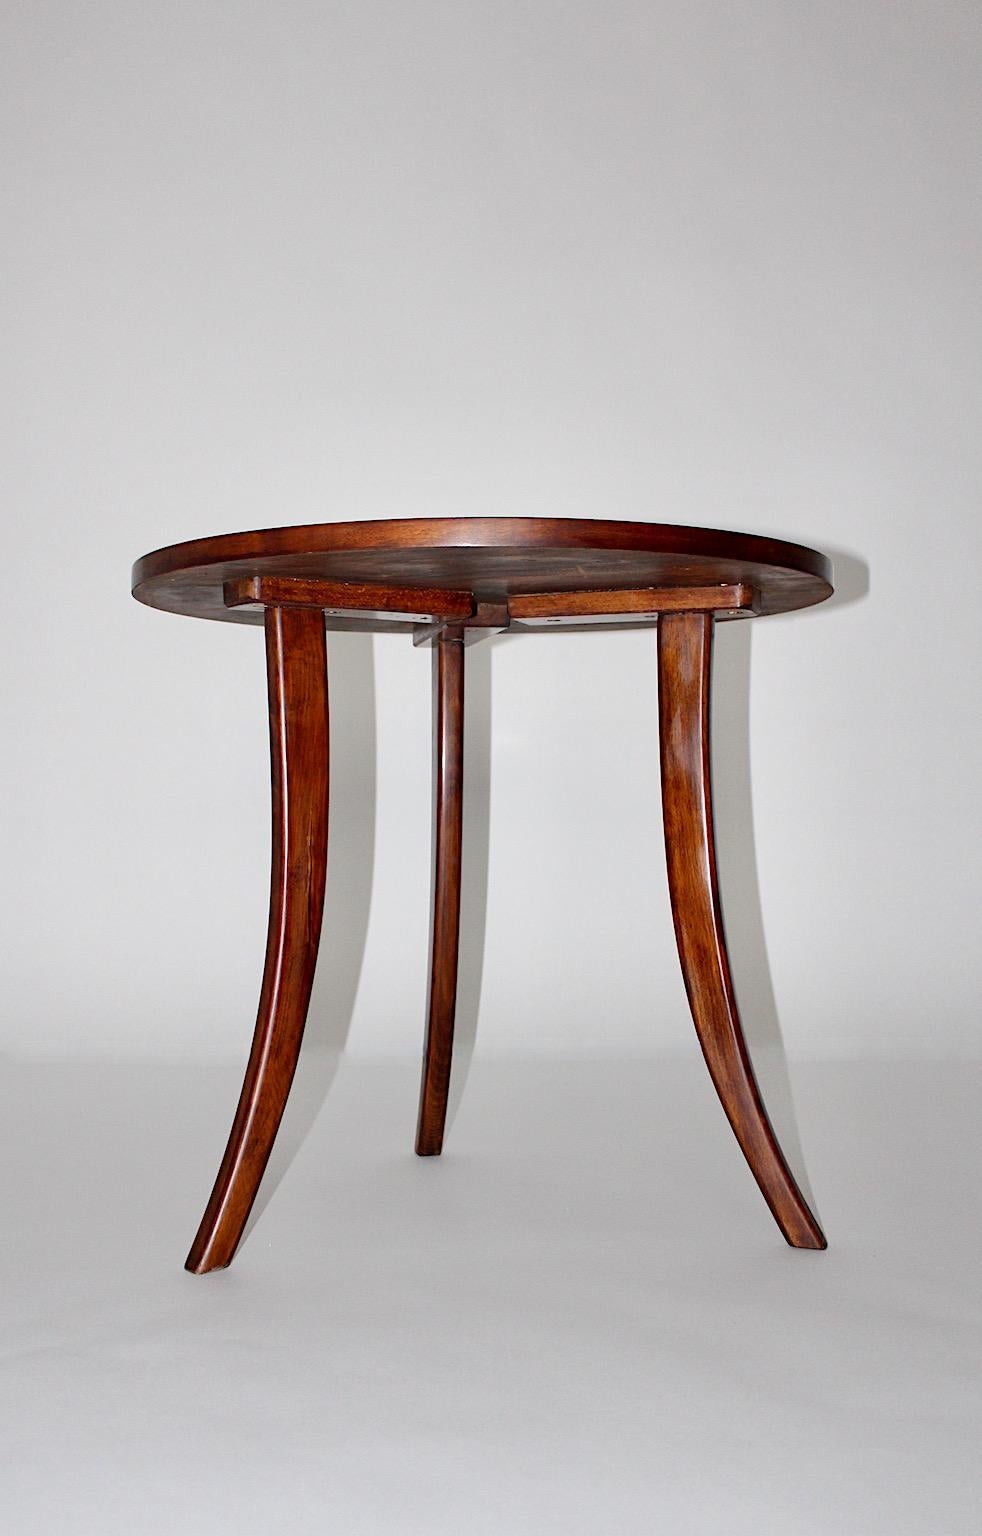 Art Deco Walnut Brown Vintage Coffee Table Side Table Josef Frank, 1930s, Vienna For Sale 7